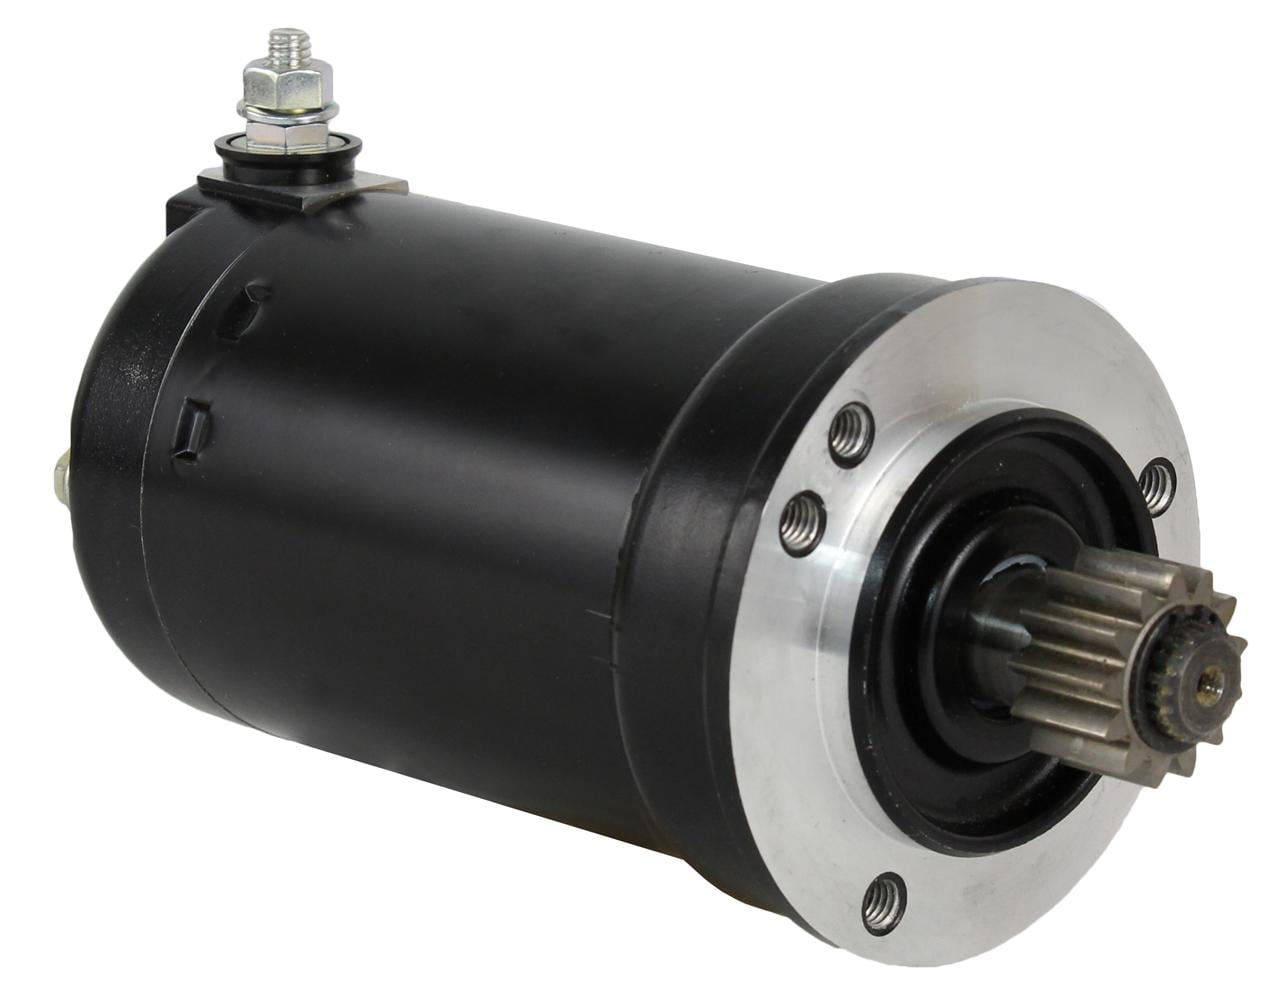 NEW DUCATI MOTORCYCLE STARTER MOTOR SUPERSPORT 750 900 620 800 S SS 128000-6050